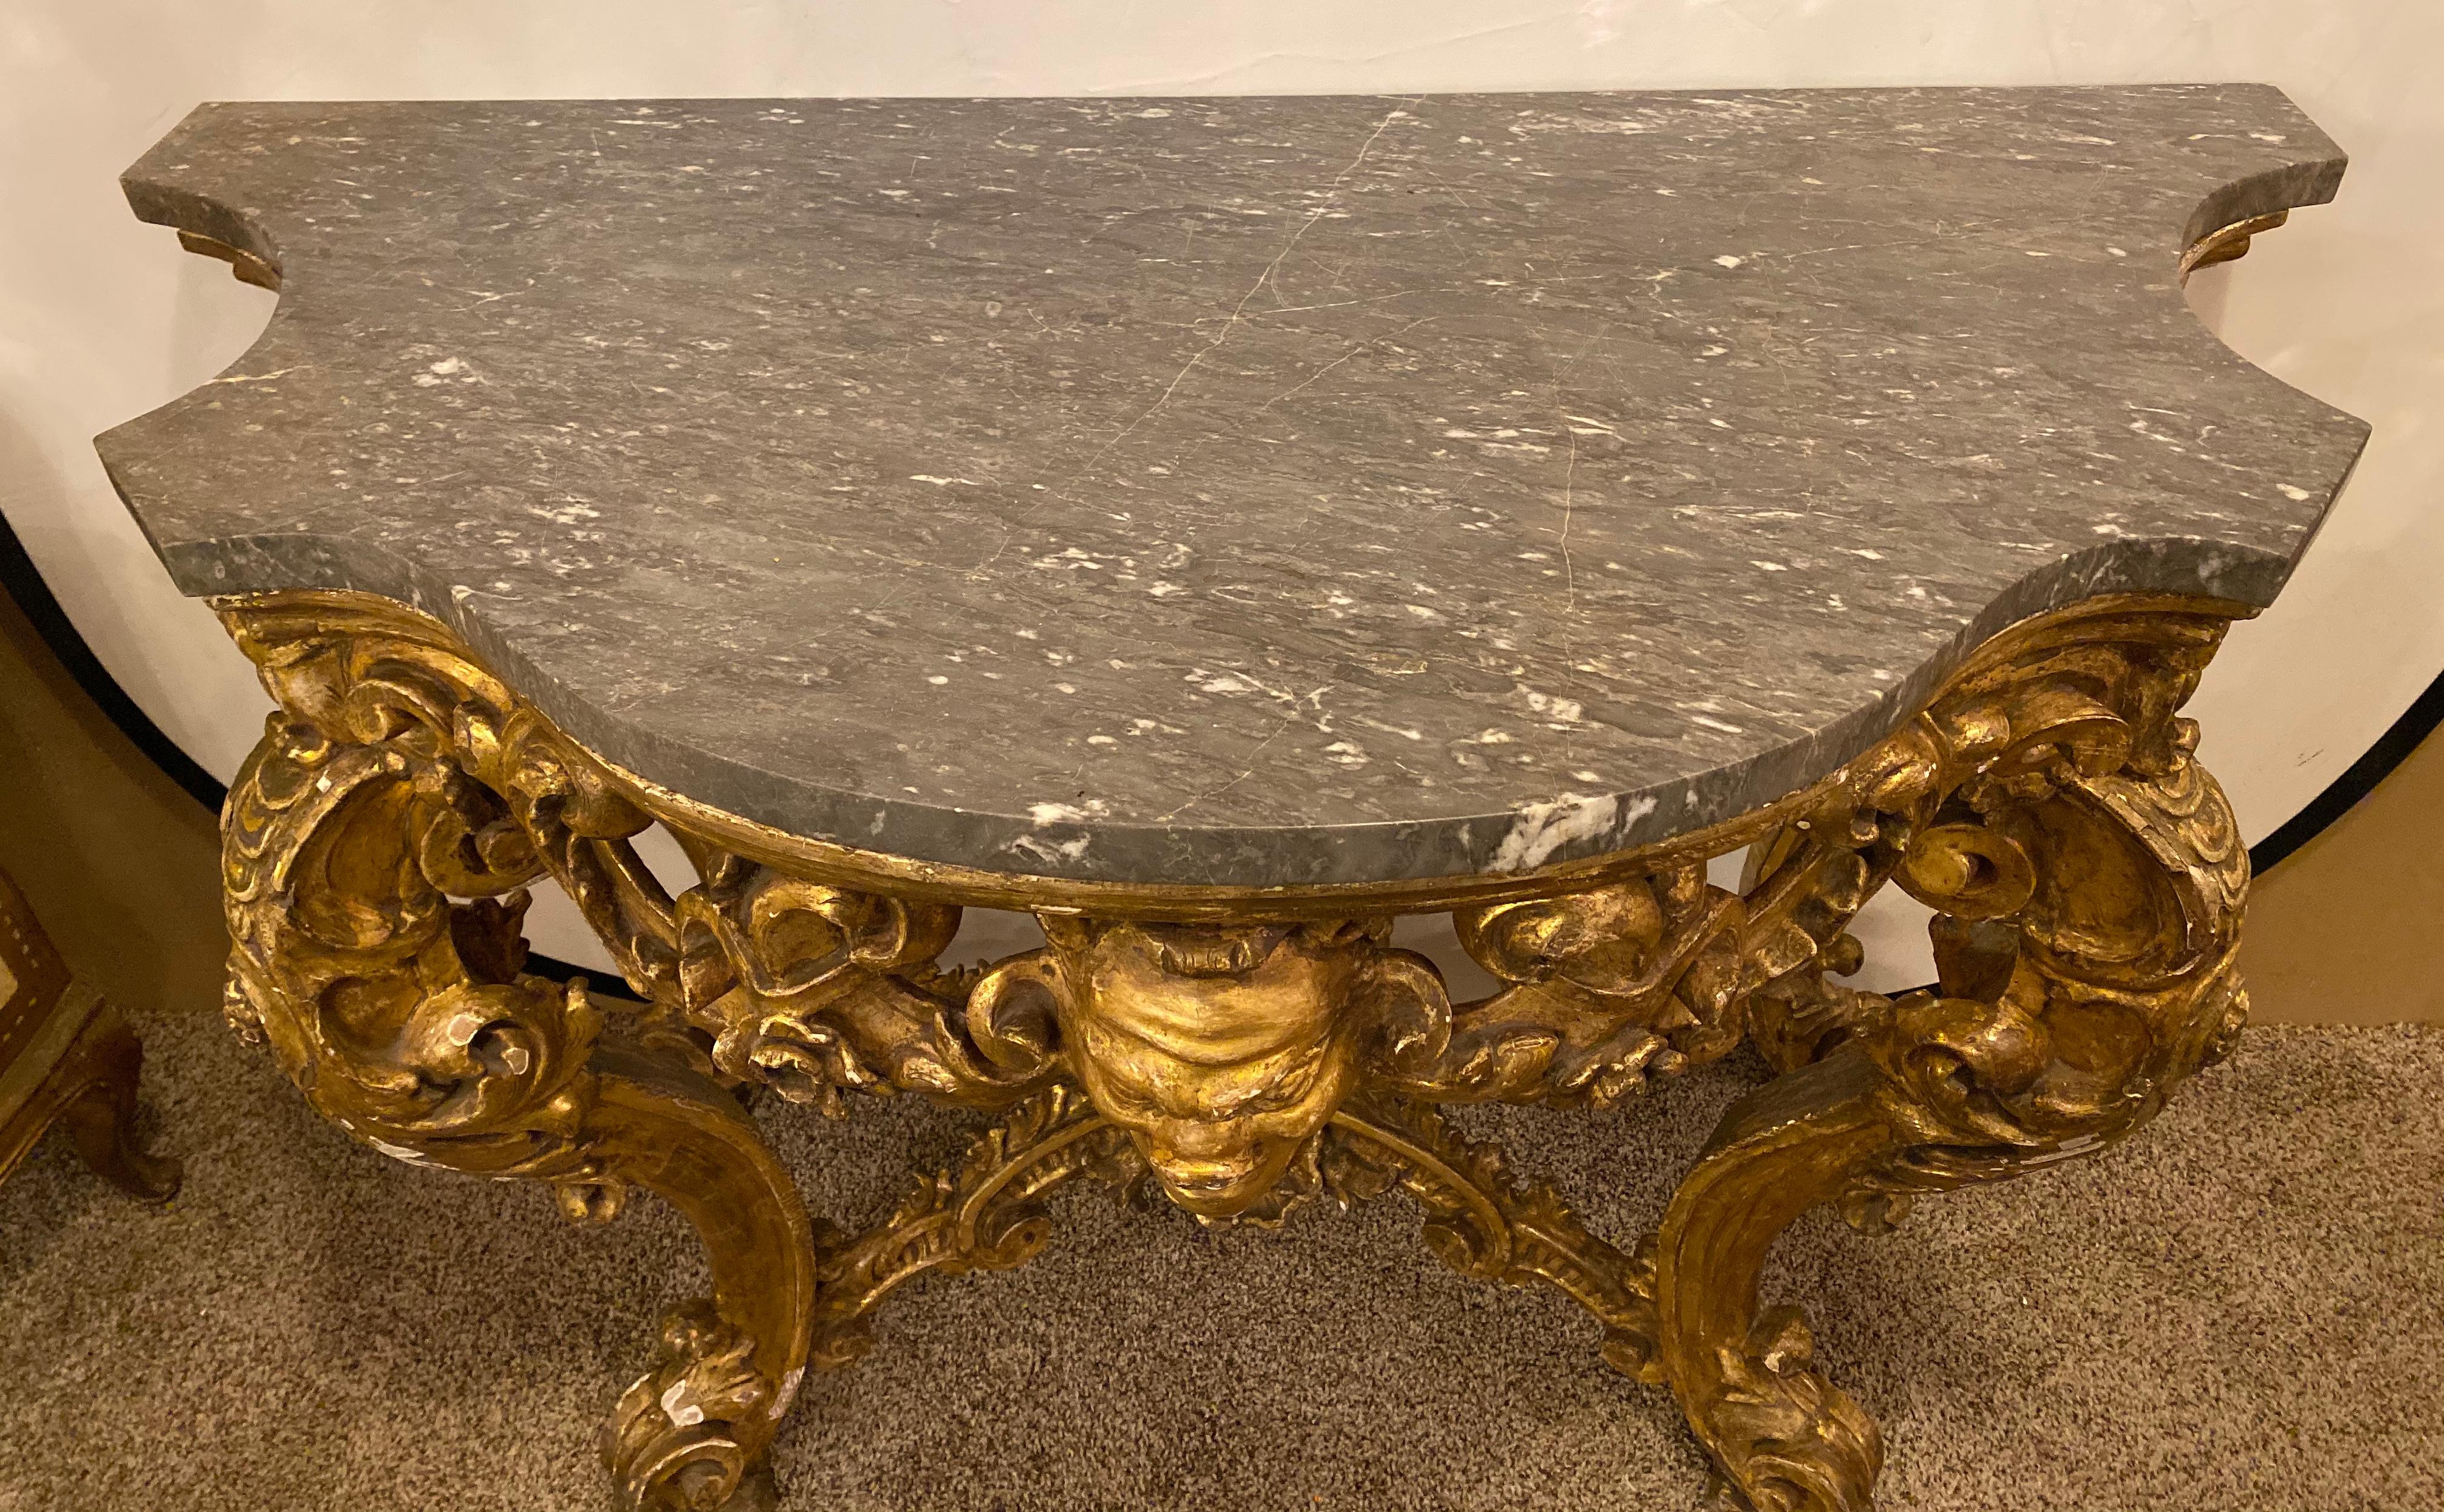 Early 20th Century 19th Century Venetian Gilt Gold Console Table, Serpentine, Ornately Carved